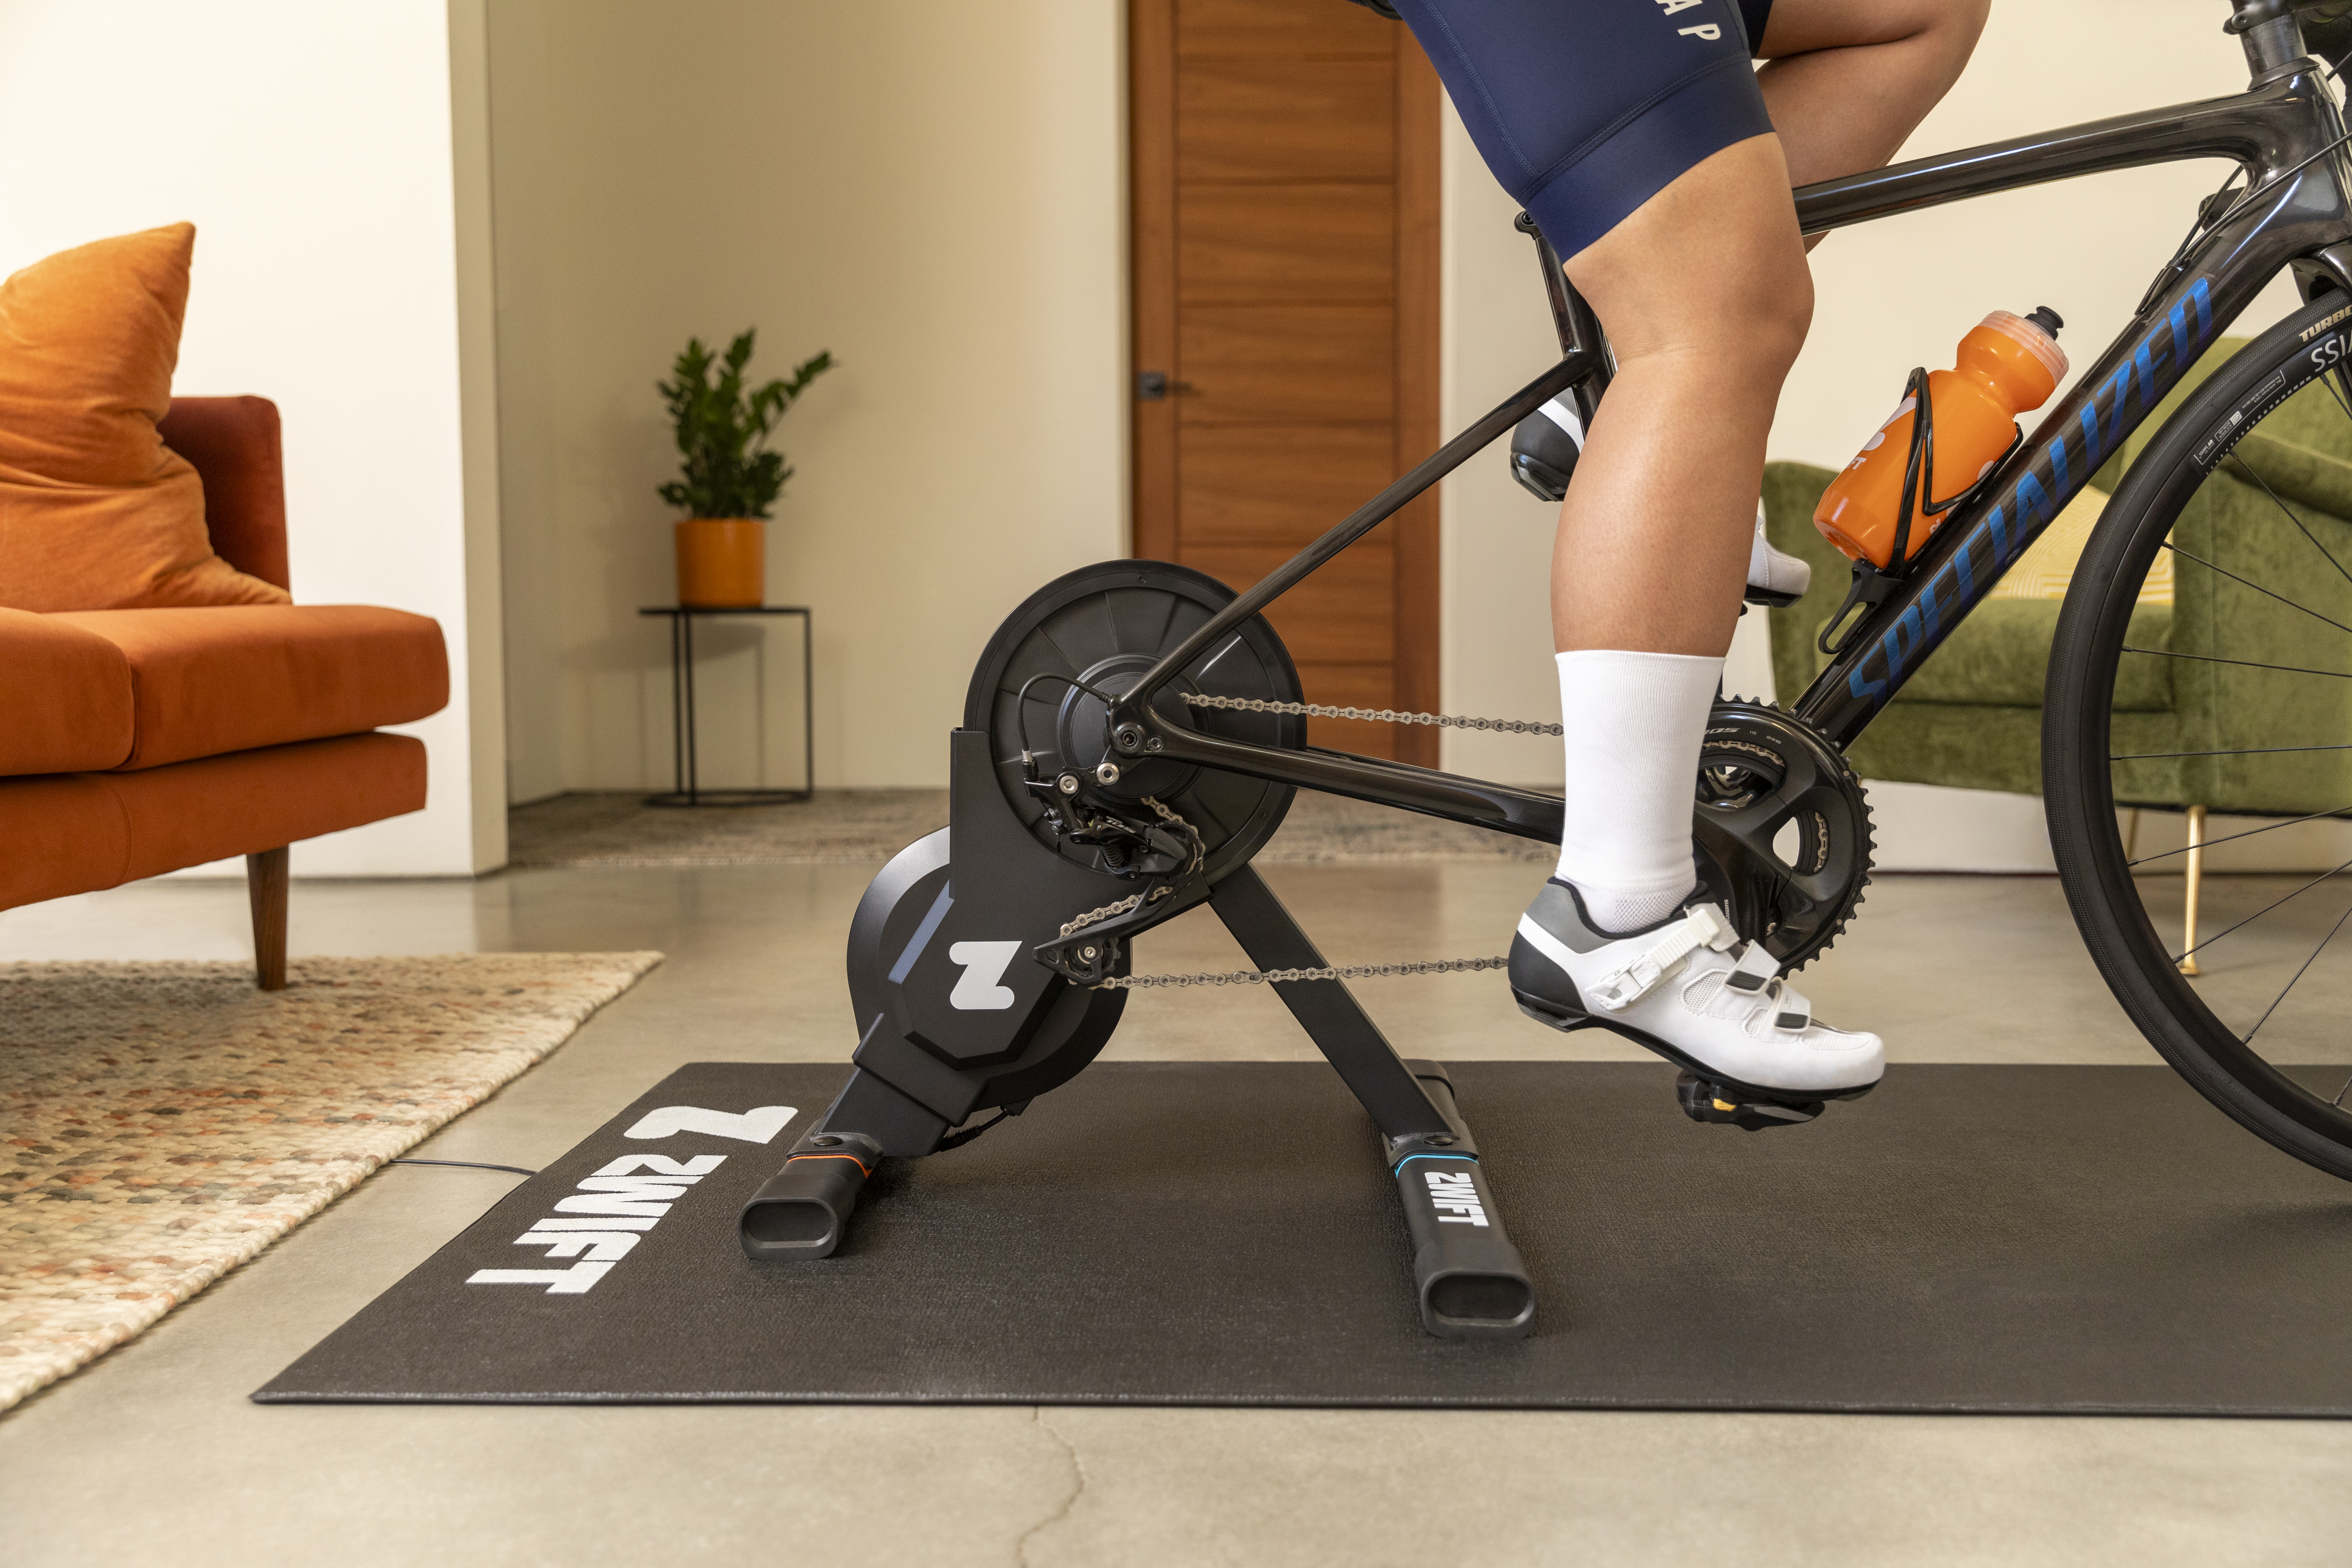 A sideview of the Zwift Hub One smart trainer in a living room with a bike connected and someone riding it.